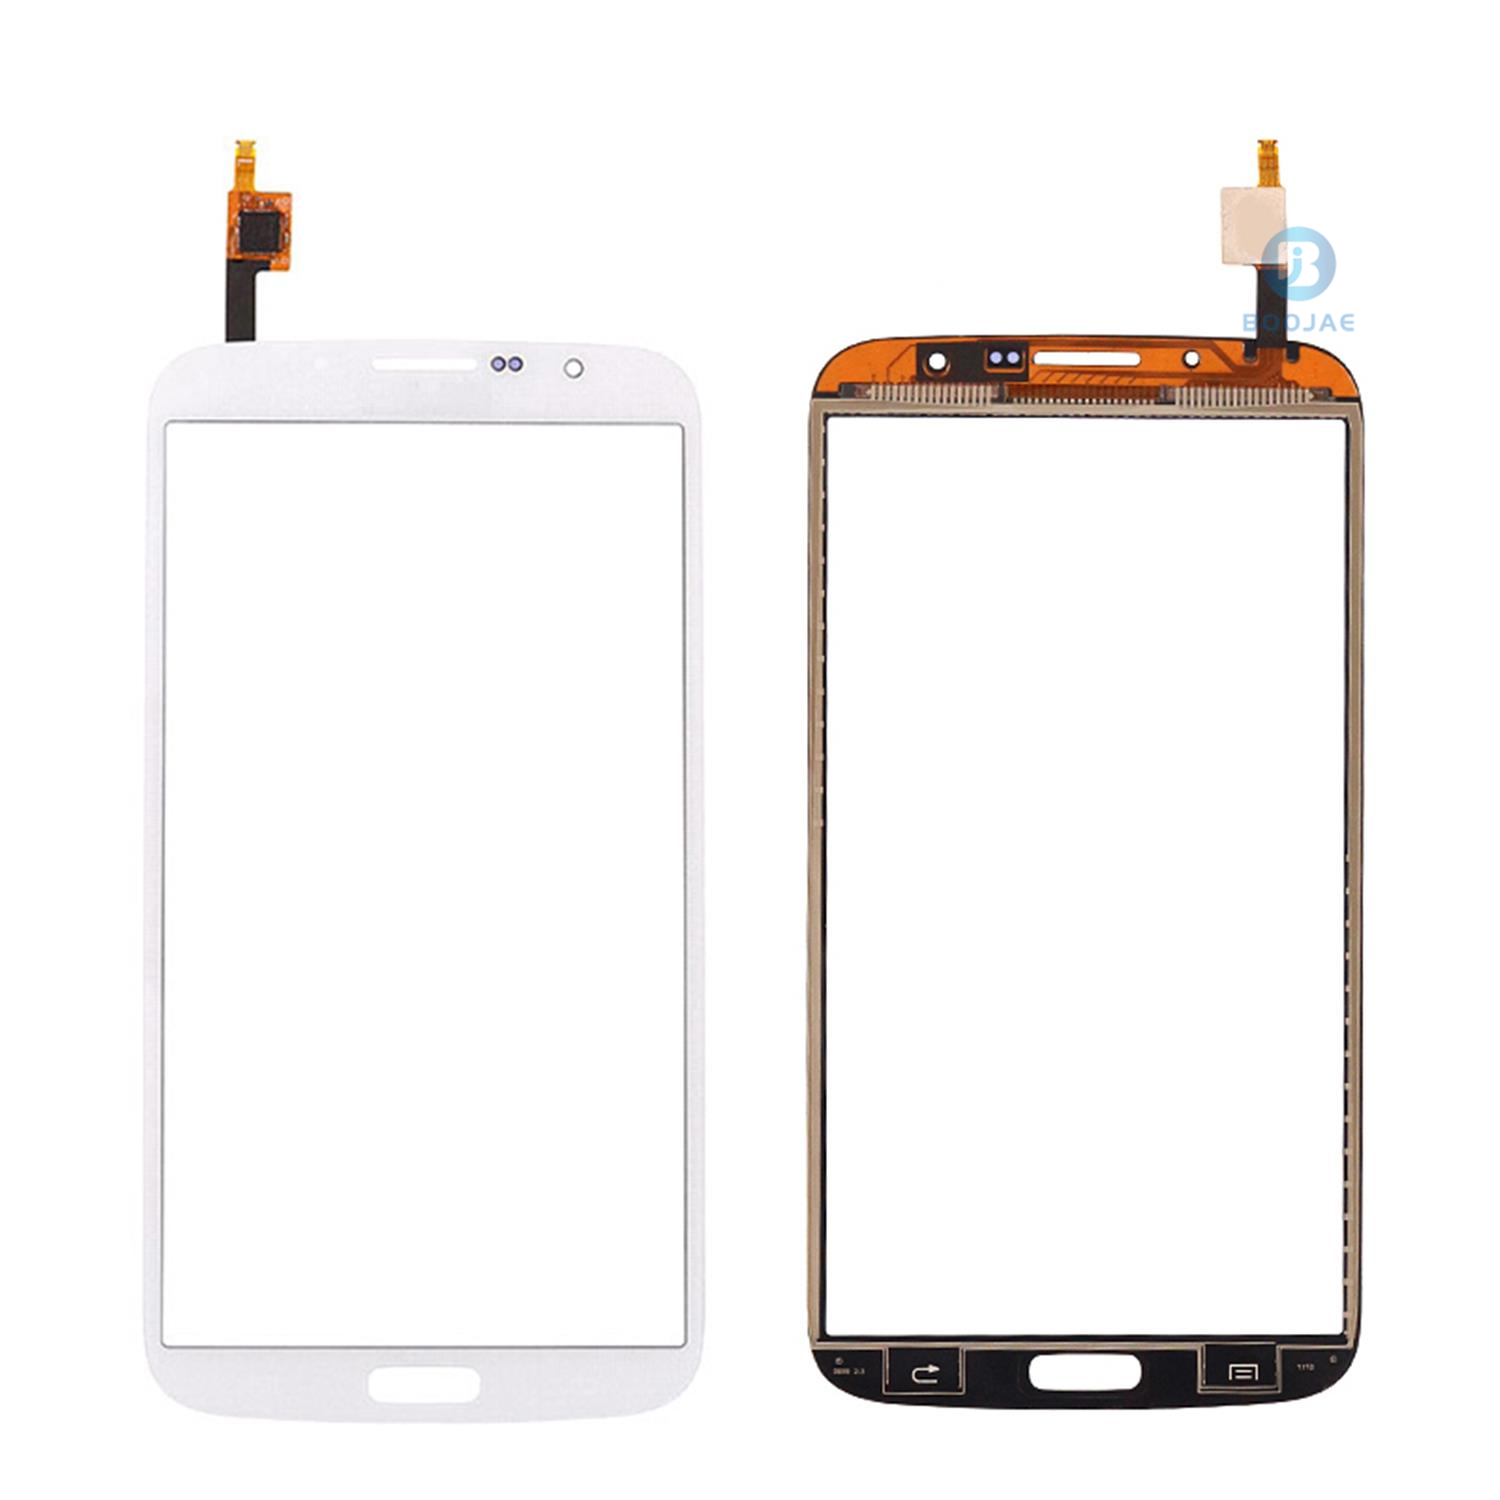 For Samsung Galaxy I9200 touch screen panel digitizer - BOOJAE